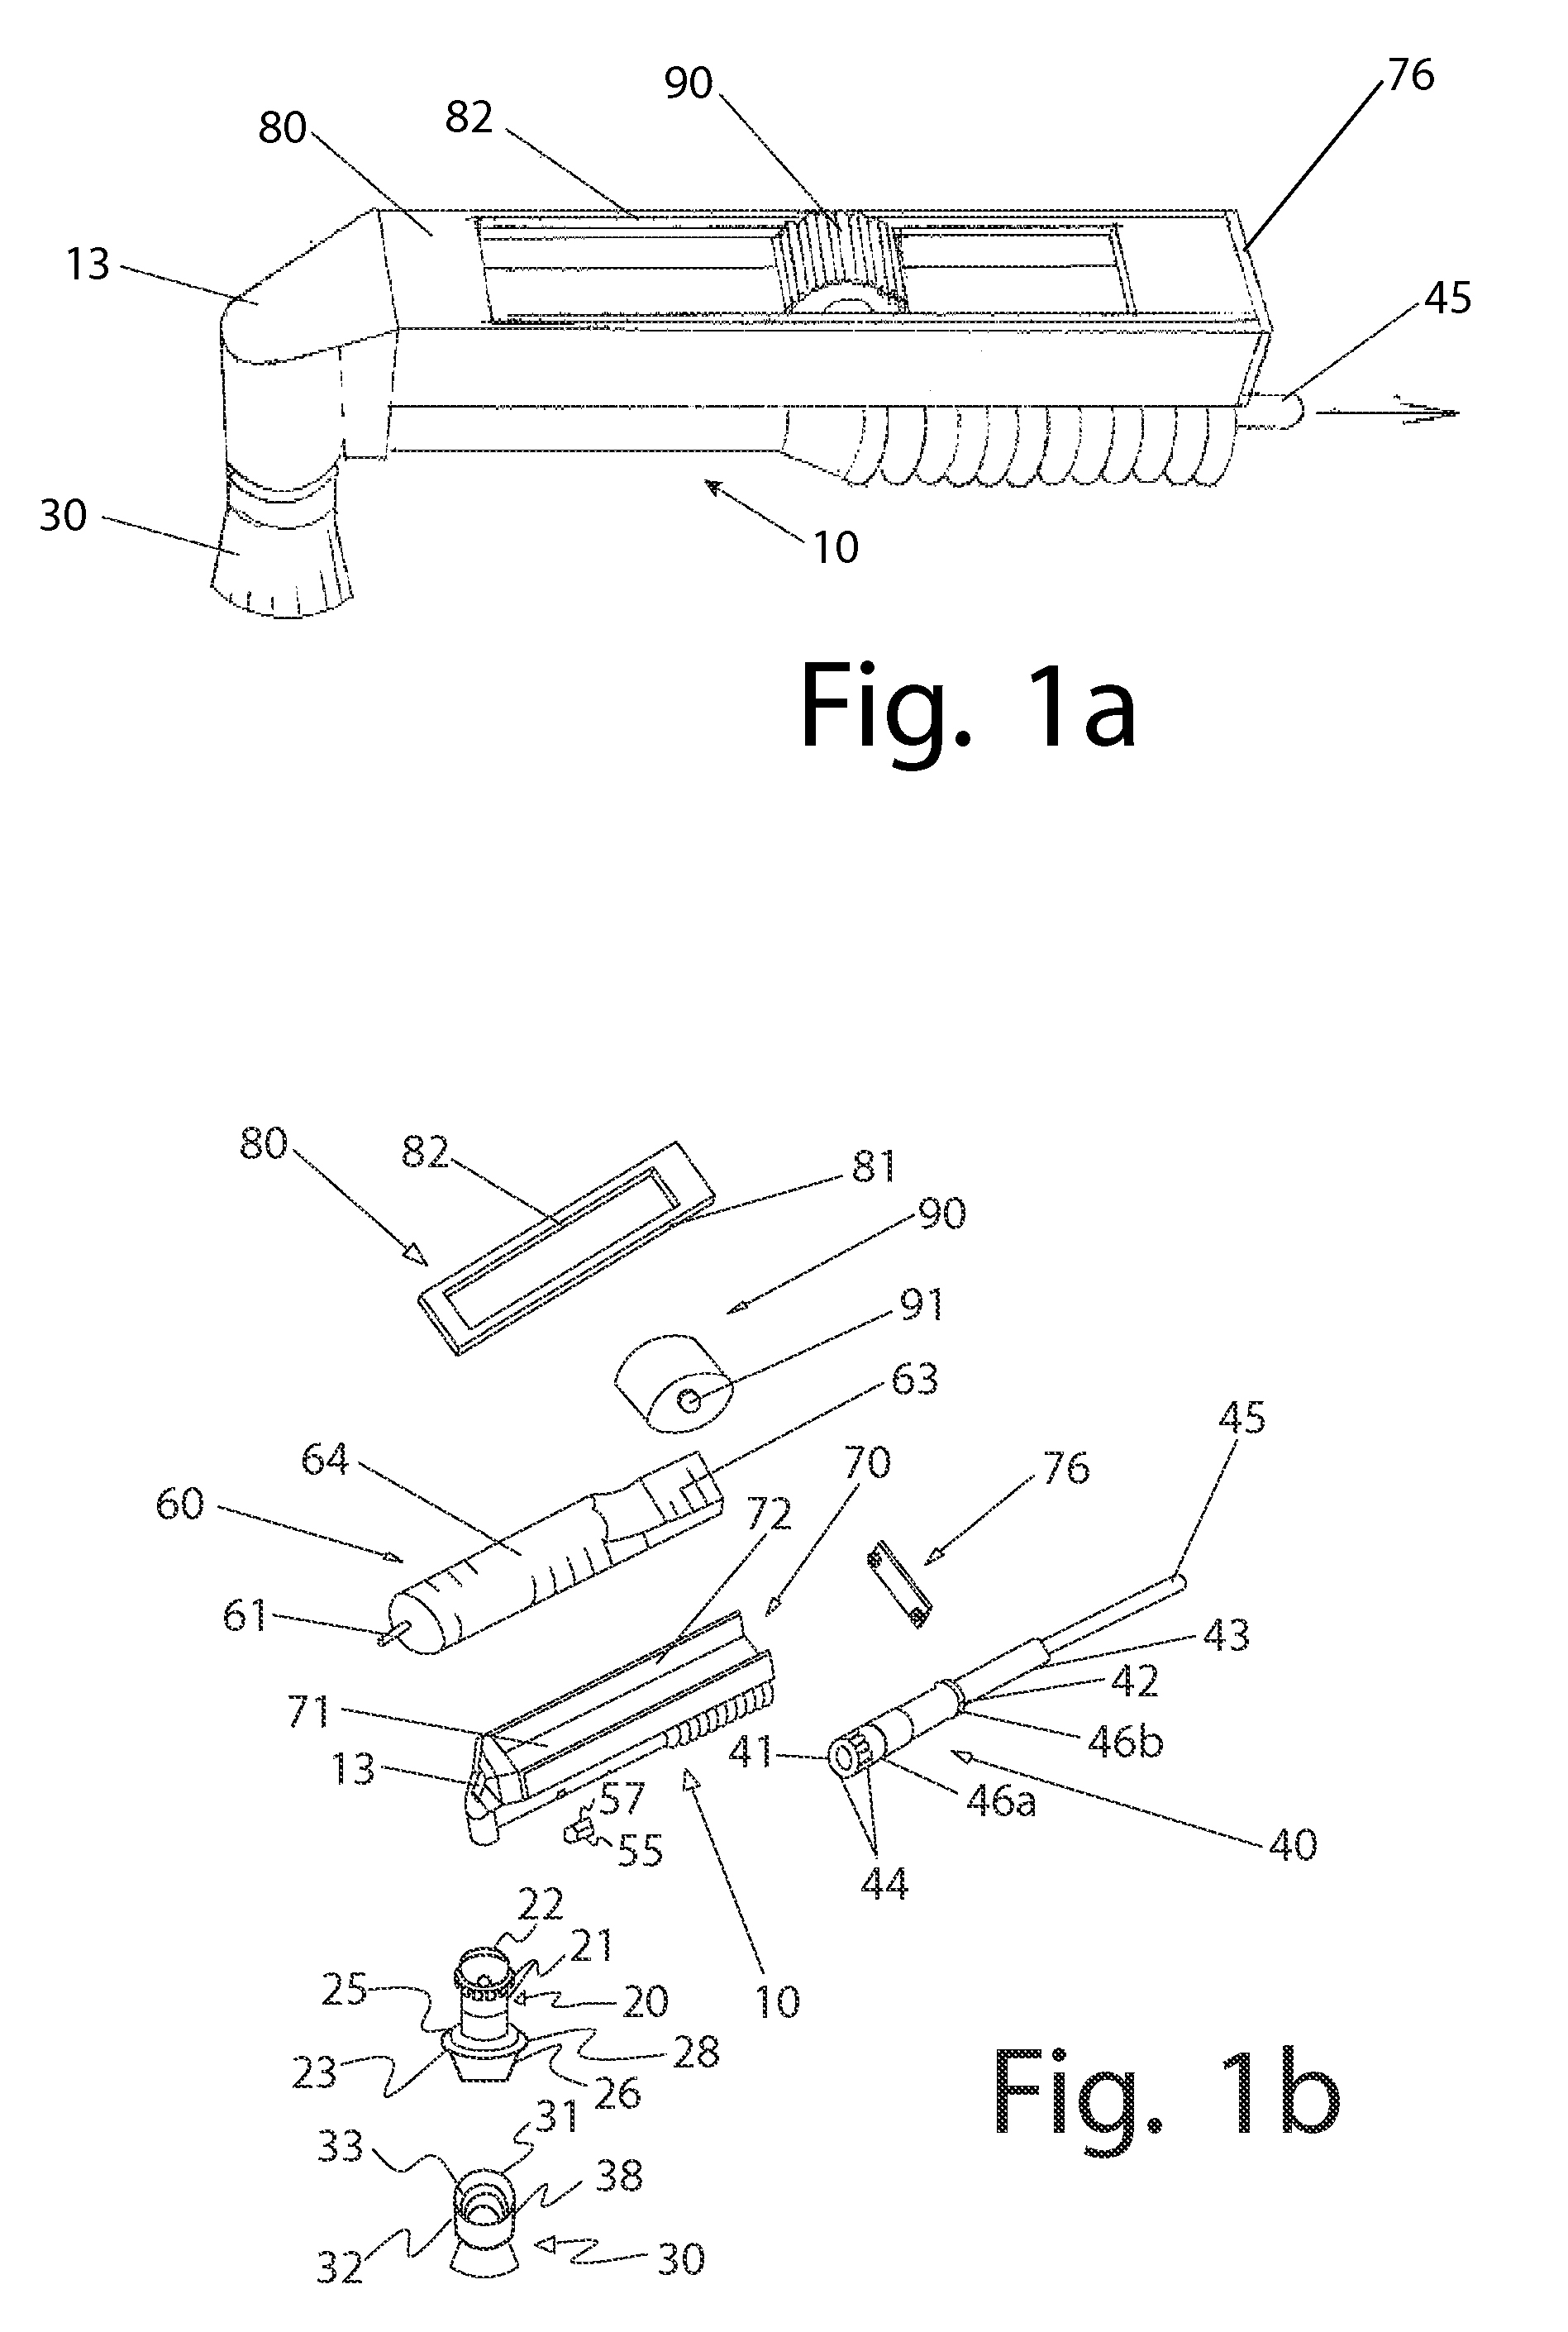 Disposable dental prophylaxis instrument capable of discharging dentifrice material